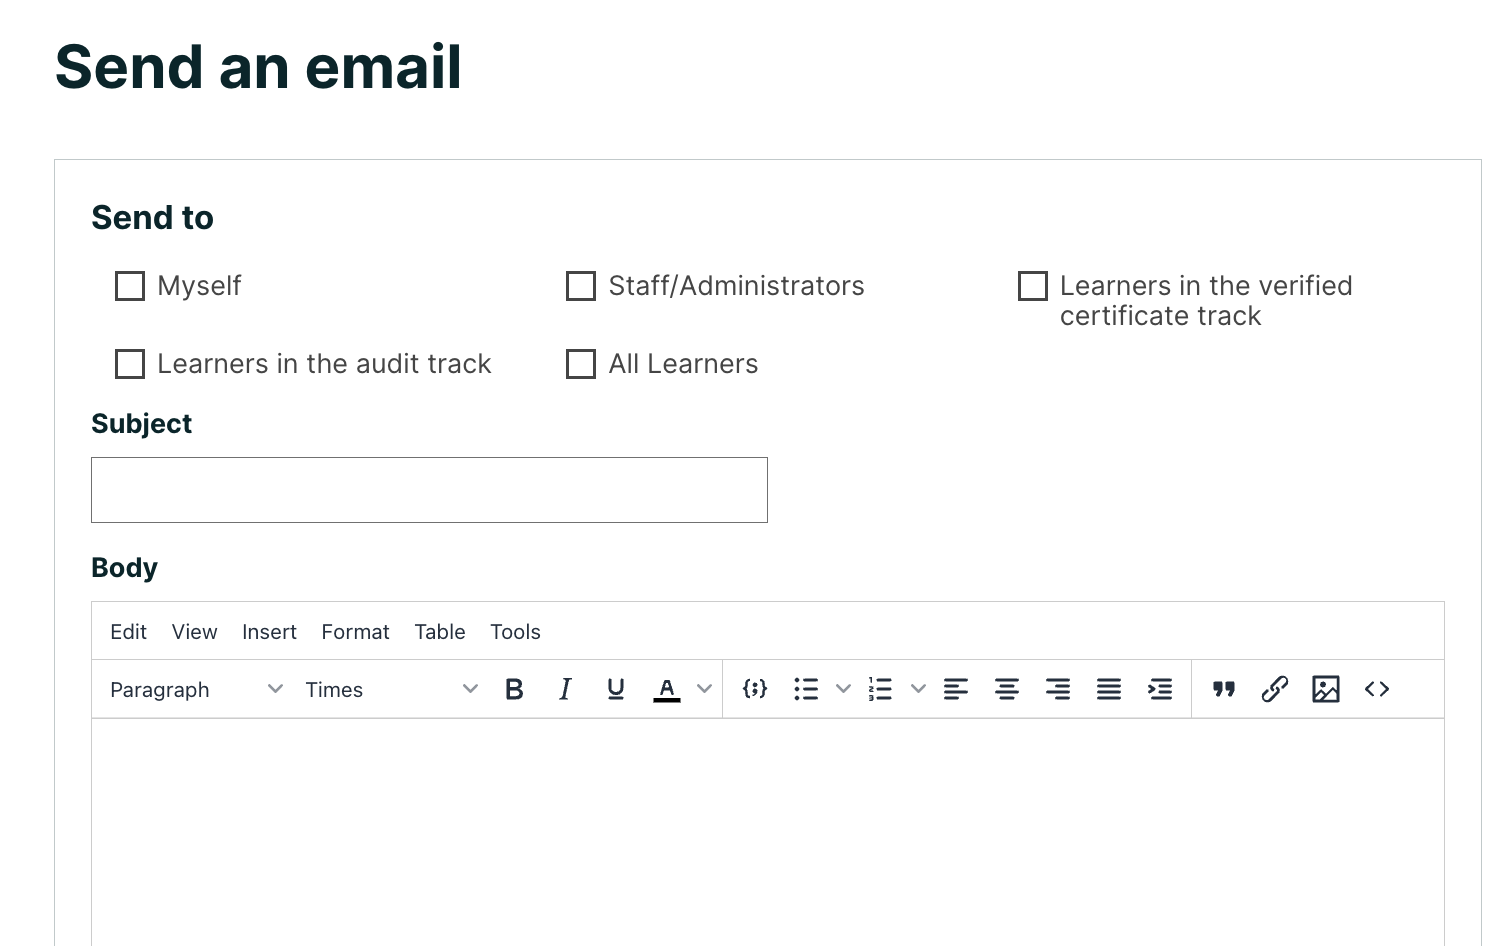 Send and Email interface for sending bulk emails